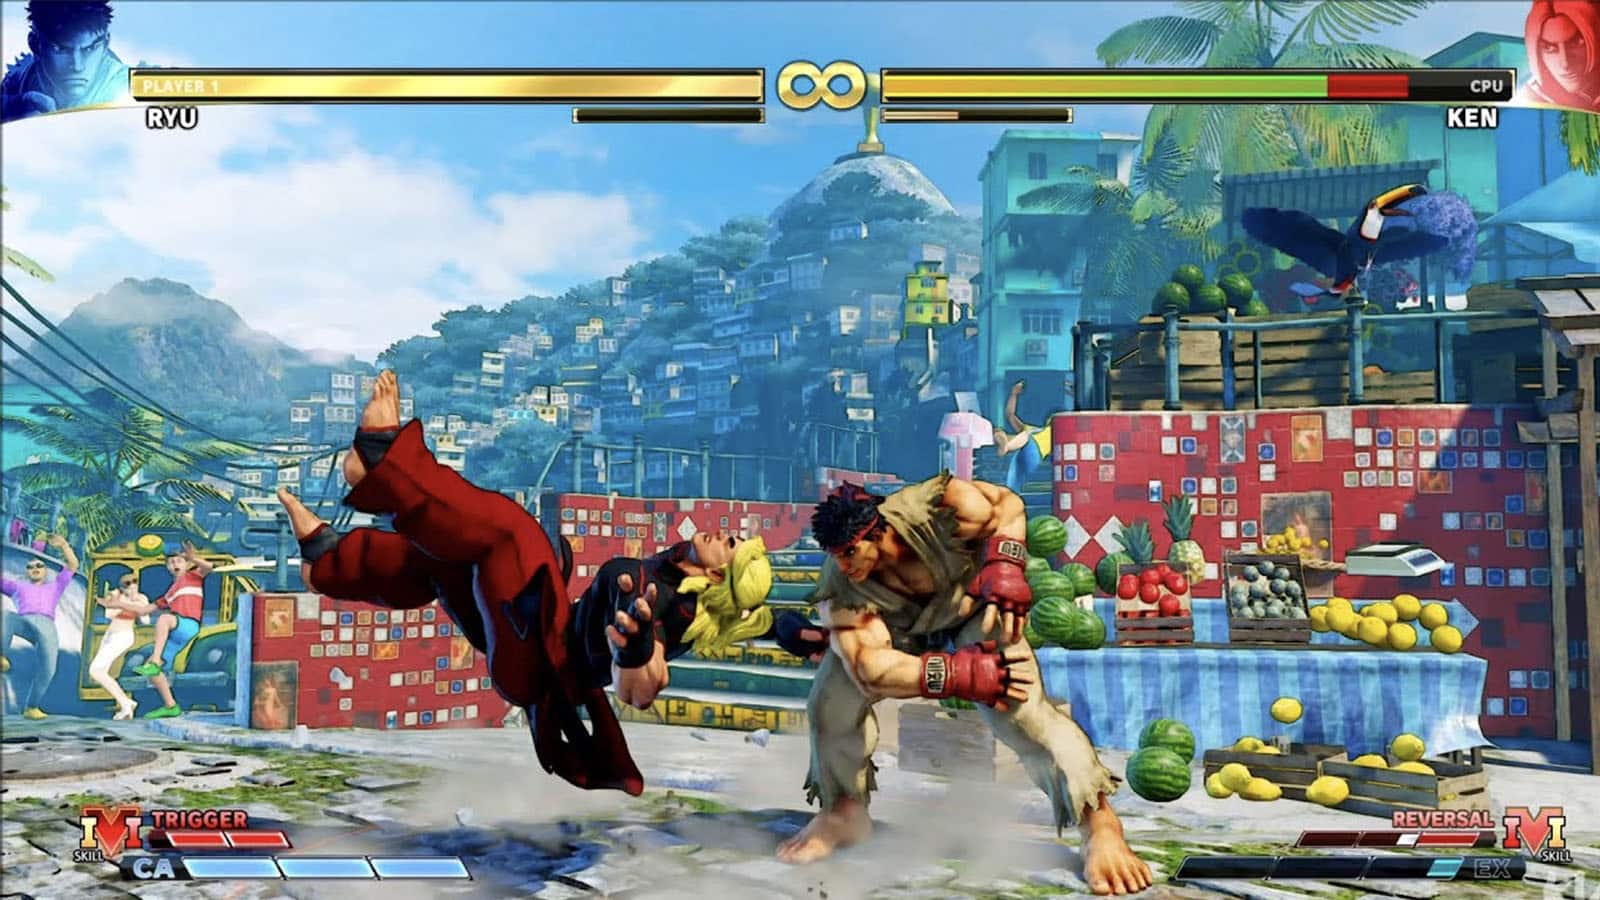 Ryu and Ken in Street Fighter 5 